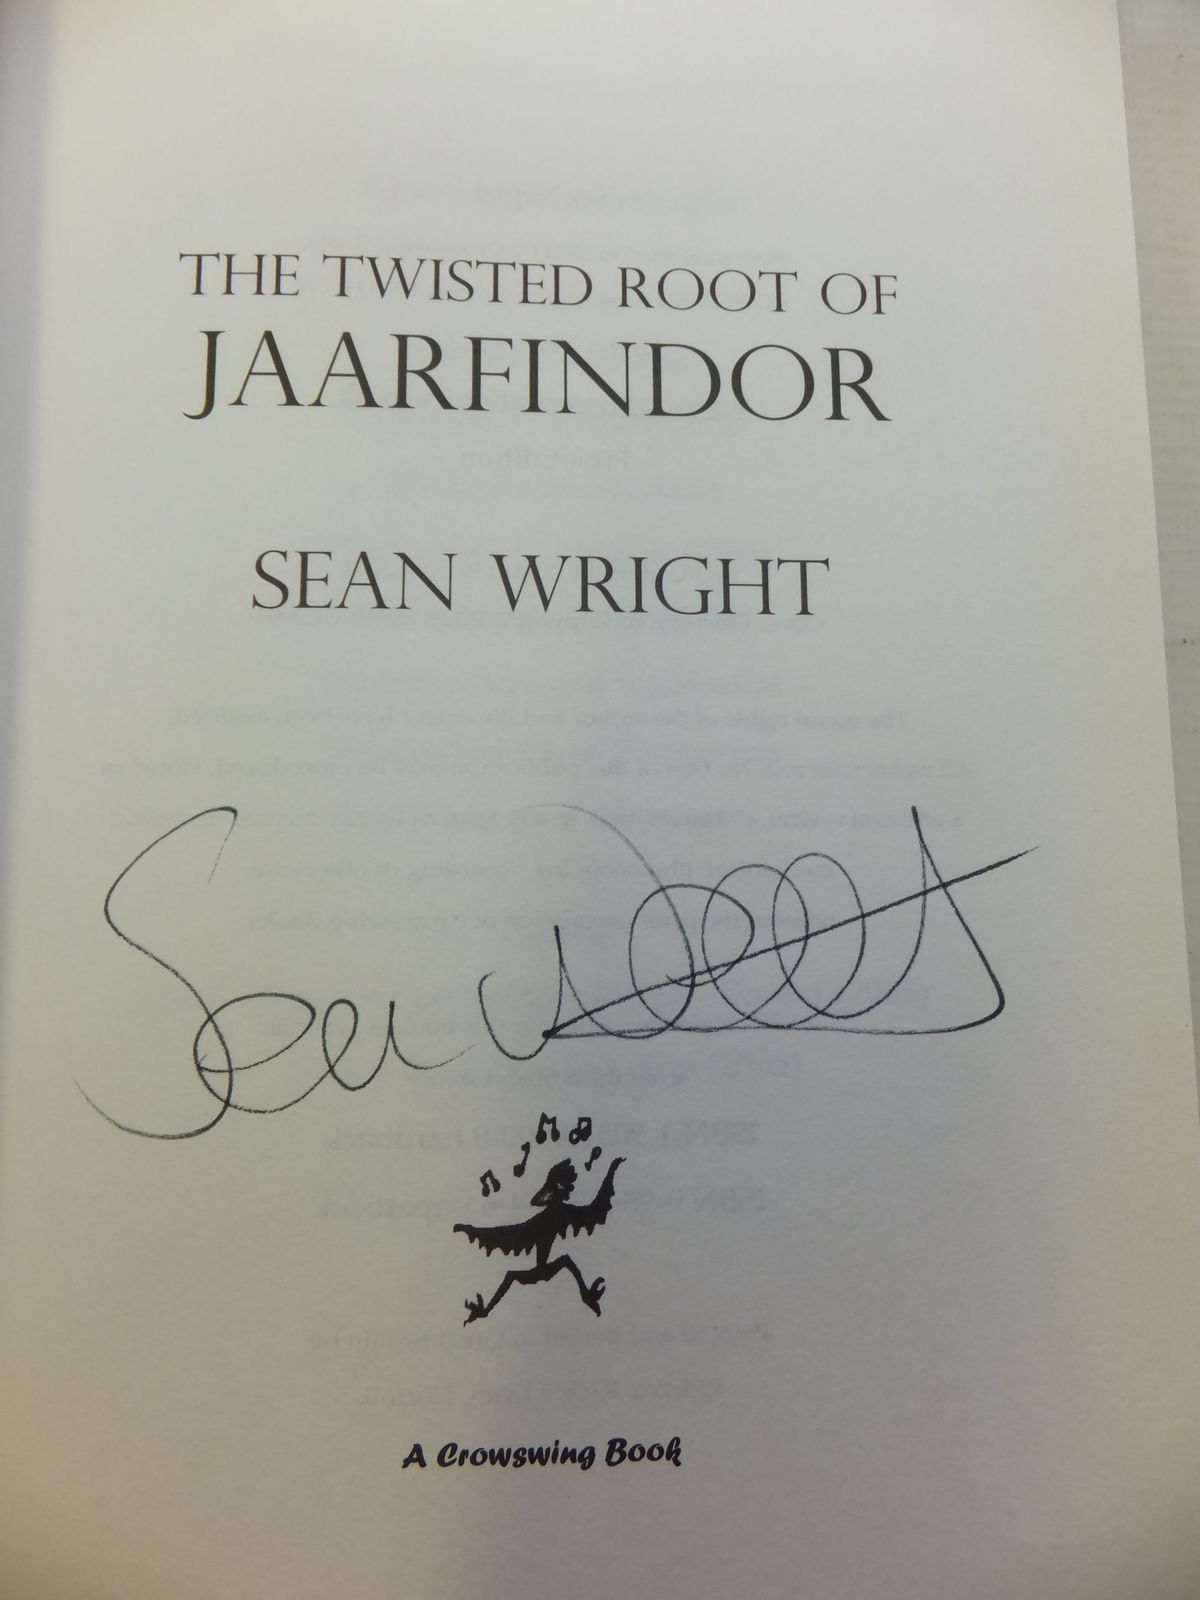 Photo of THE TWISTED ROOT OF JAARFINDOR written by Wright, Sean published by Crowswing Books (STOCK CODE: 1207813)  for sale by Stella & Rose's Books